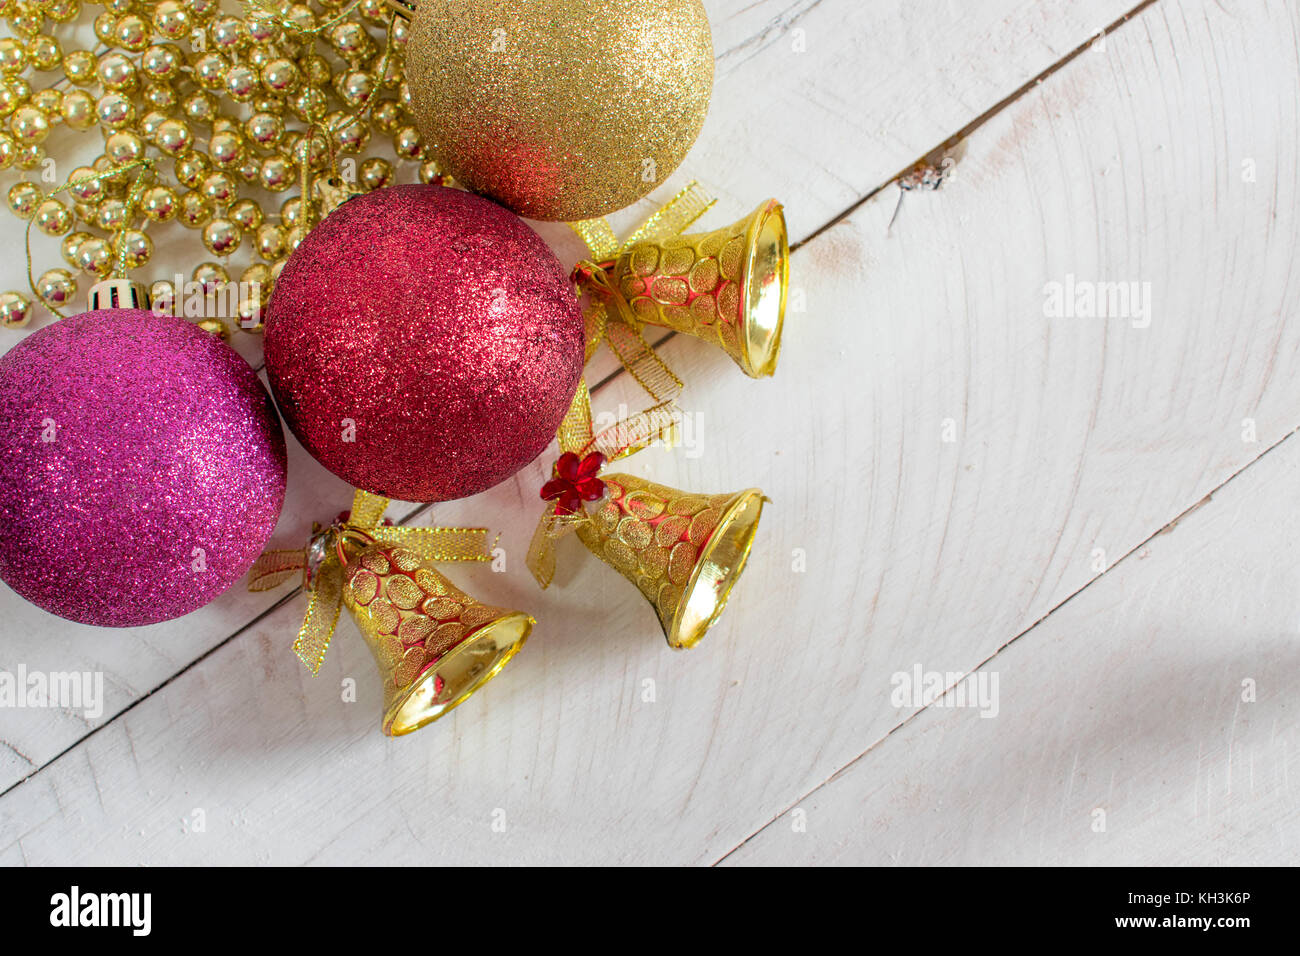 Christmas Decoration, chains, bells and colorful reflective balls, on top of a white wood surface and white background Stock Photo